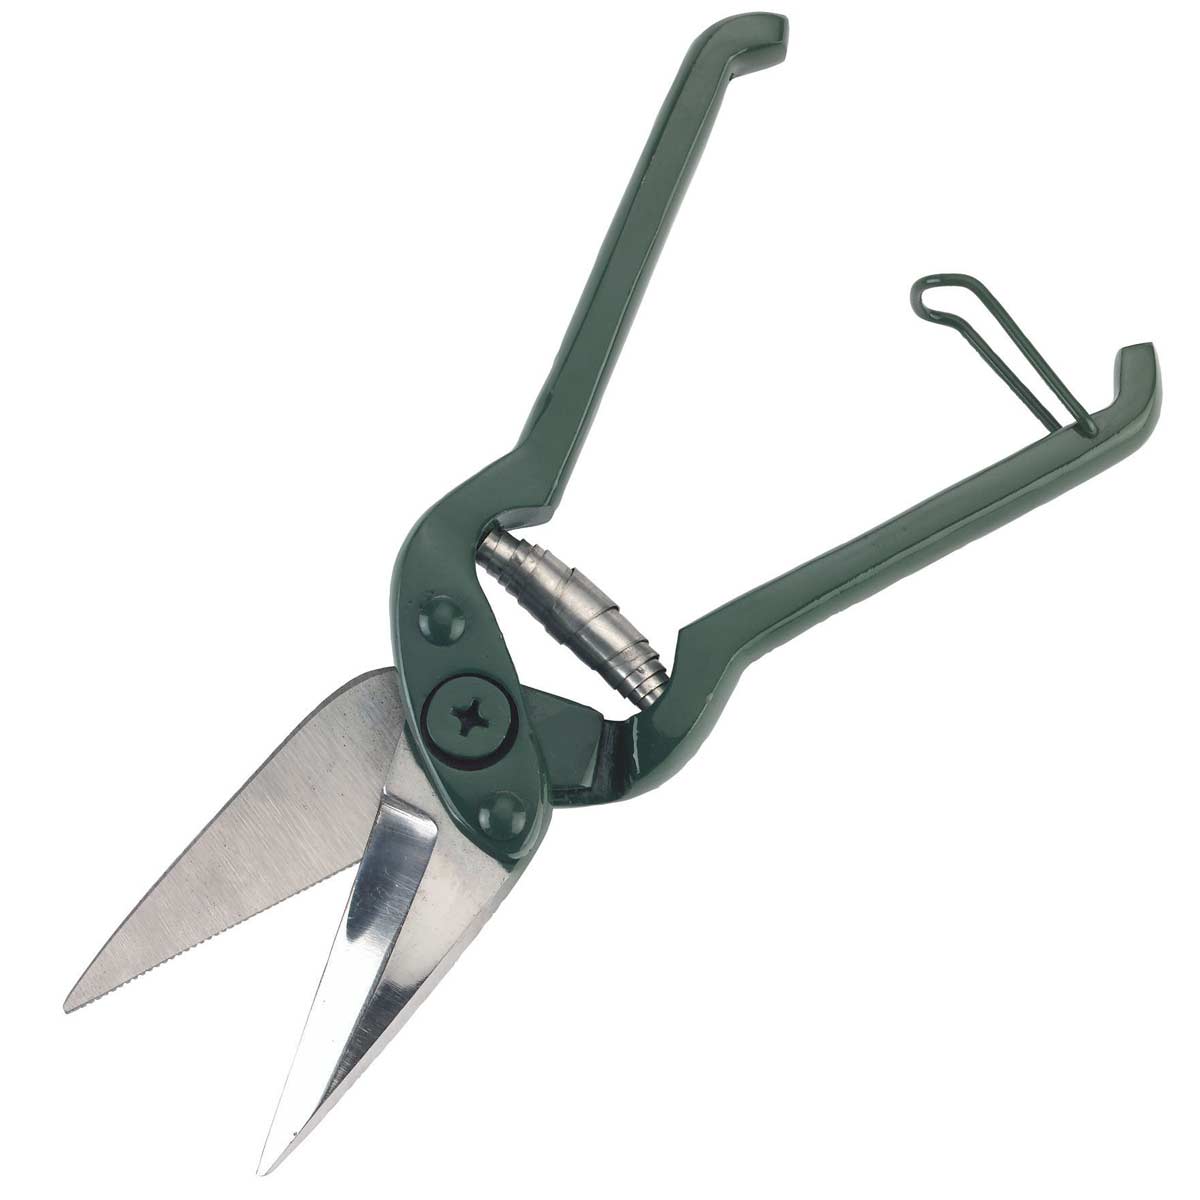 Claw shear with teeth for sheep serrated